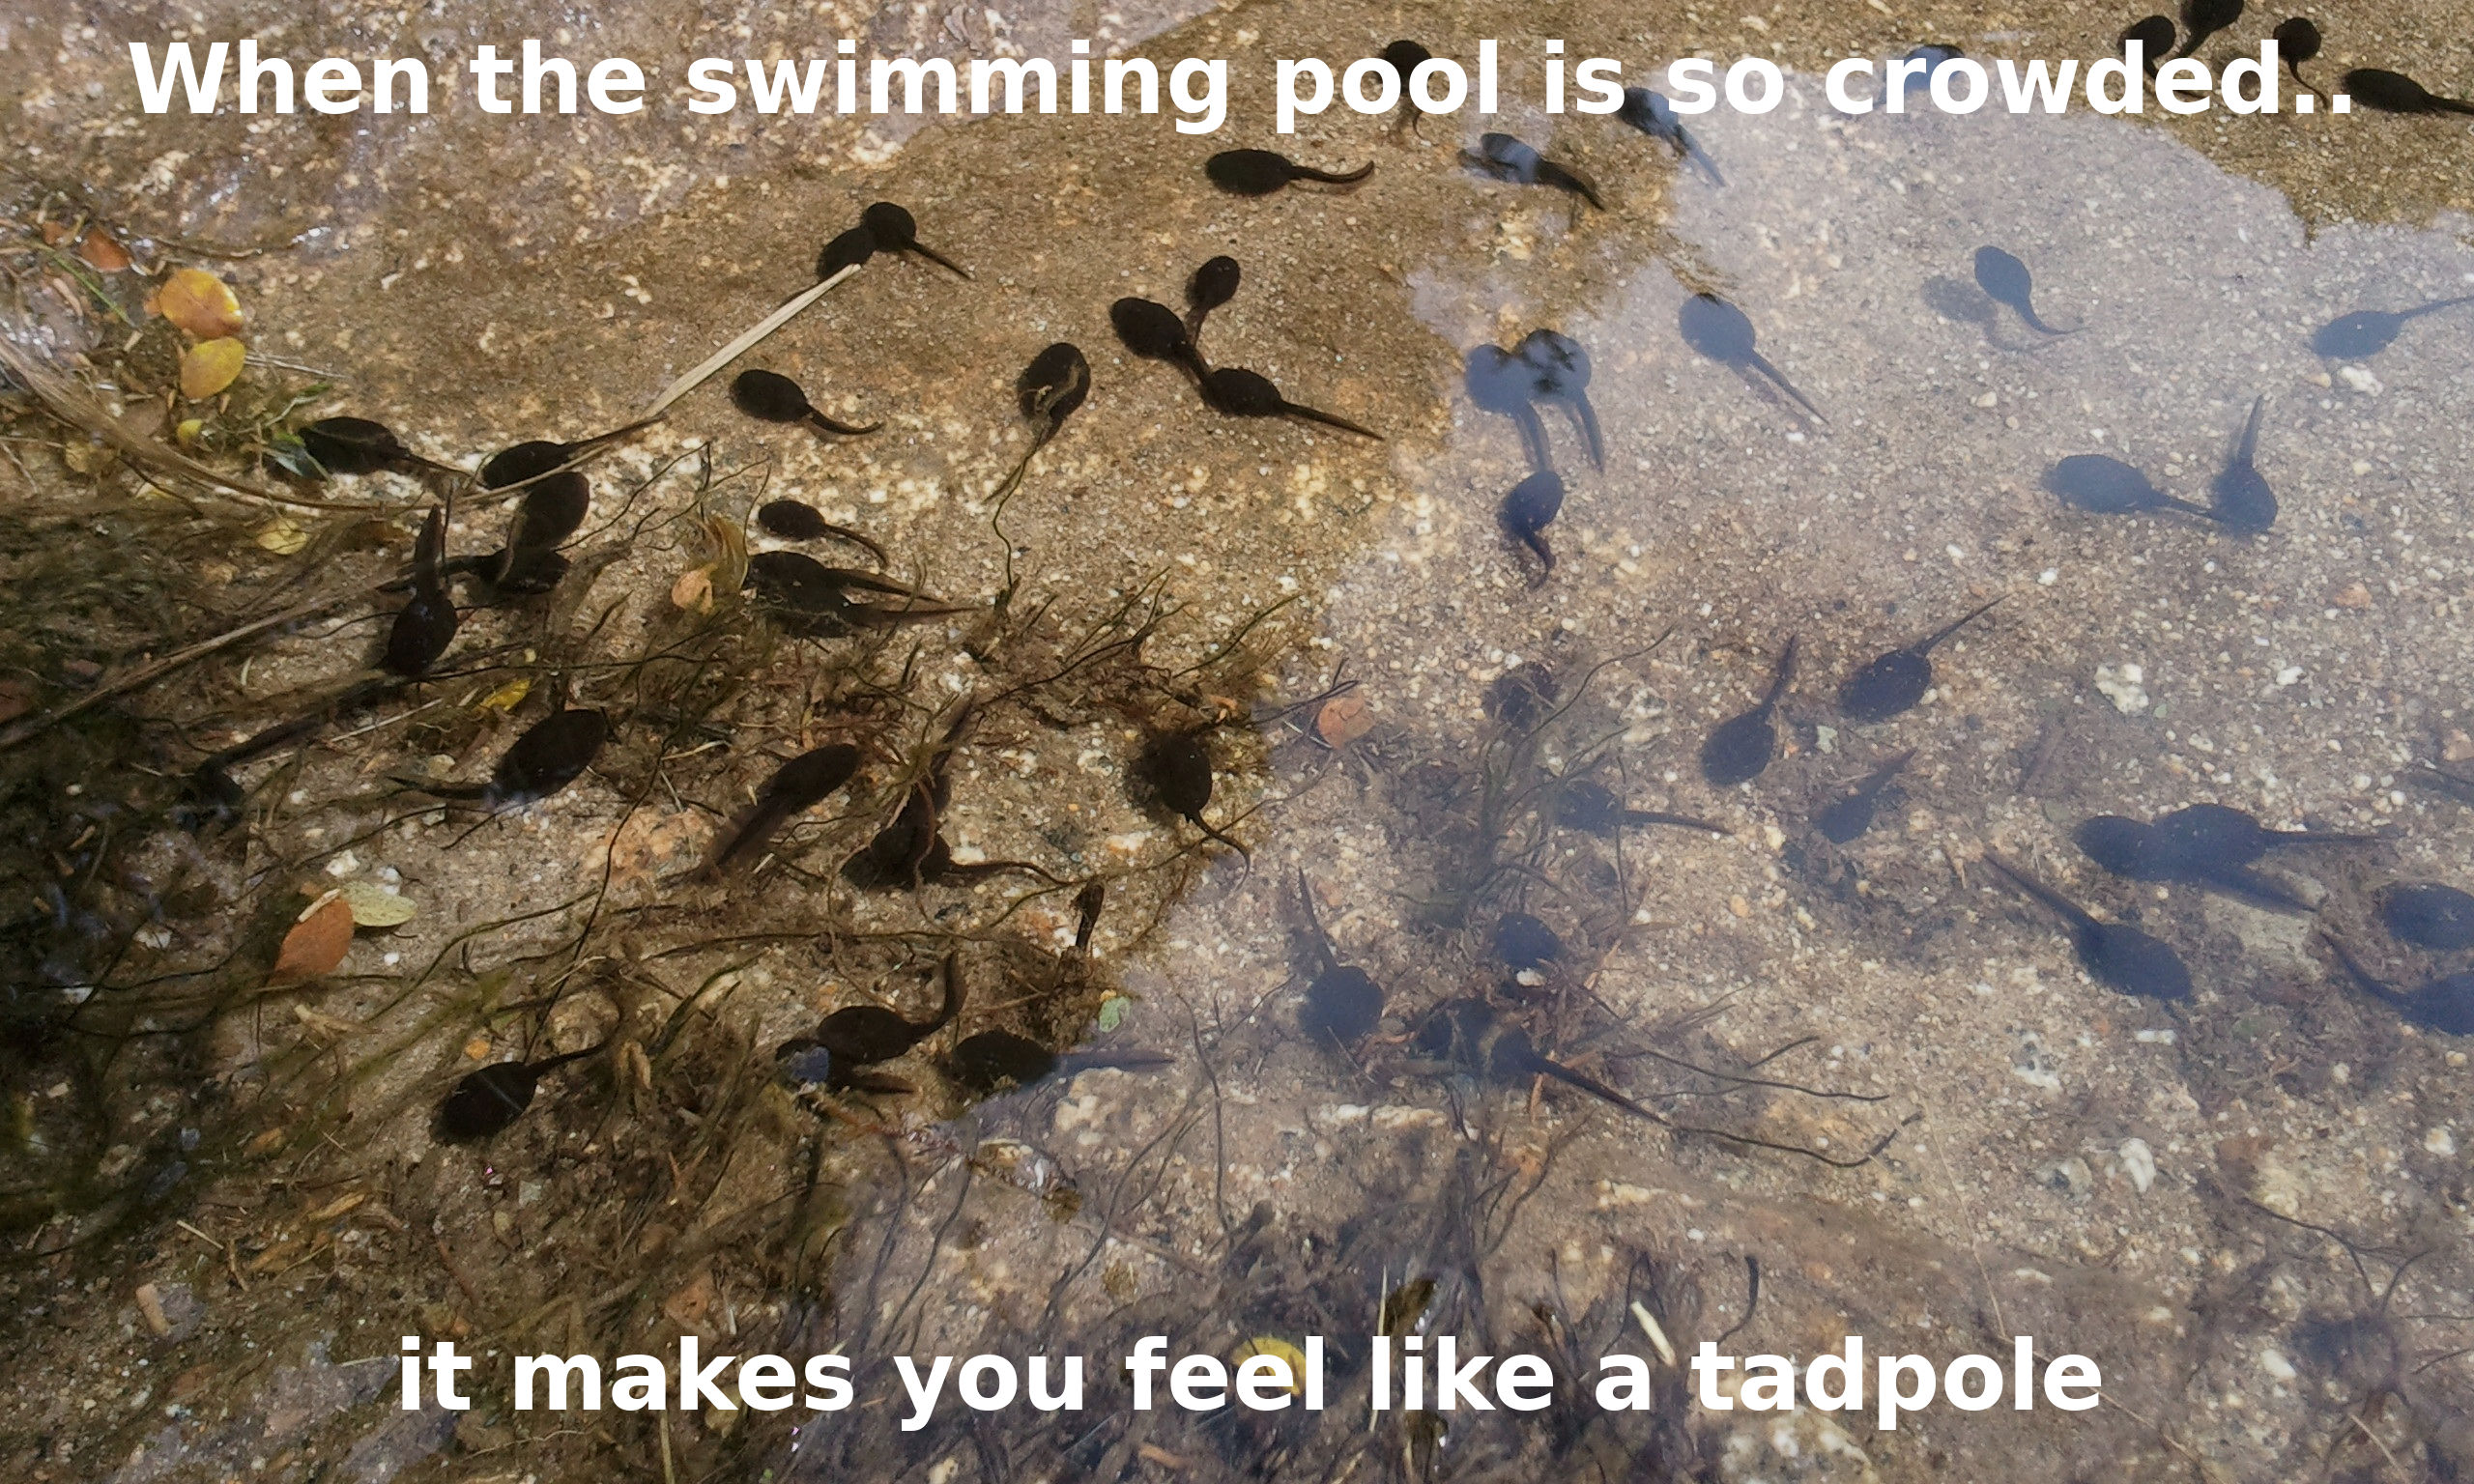 Small dam with tadpoles